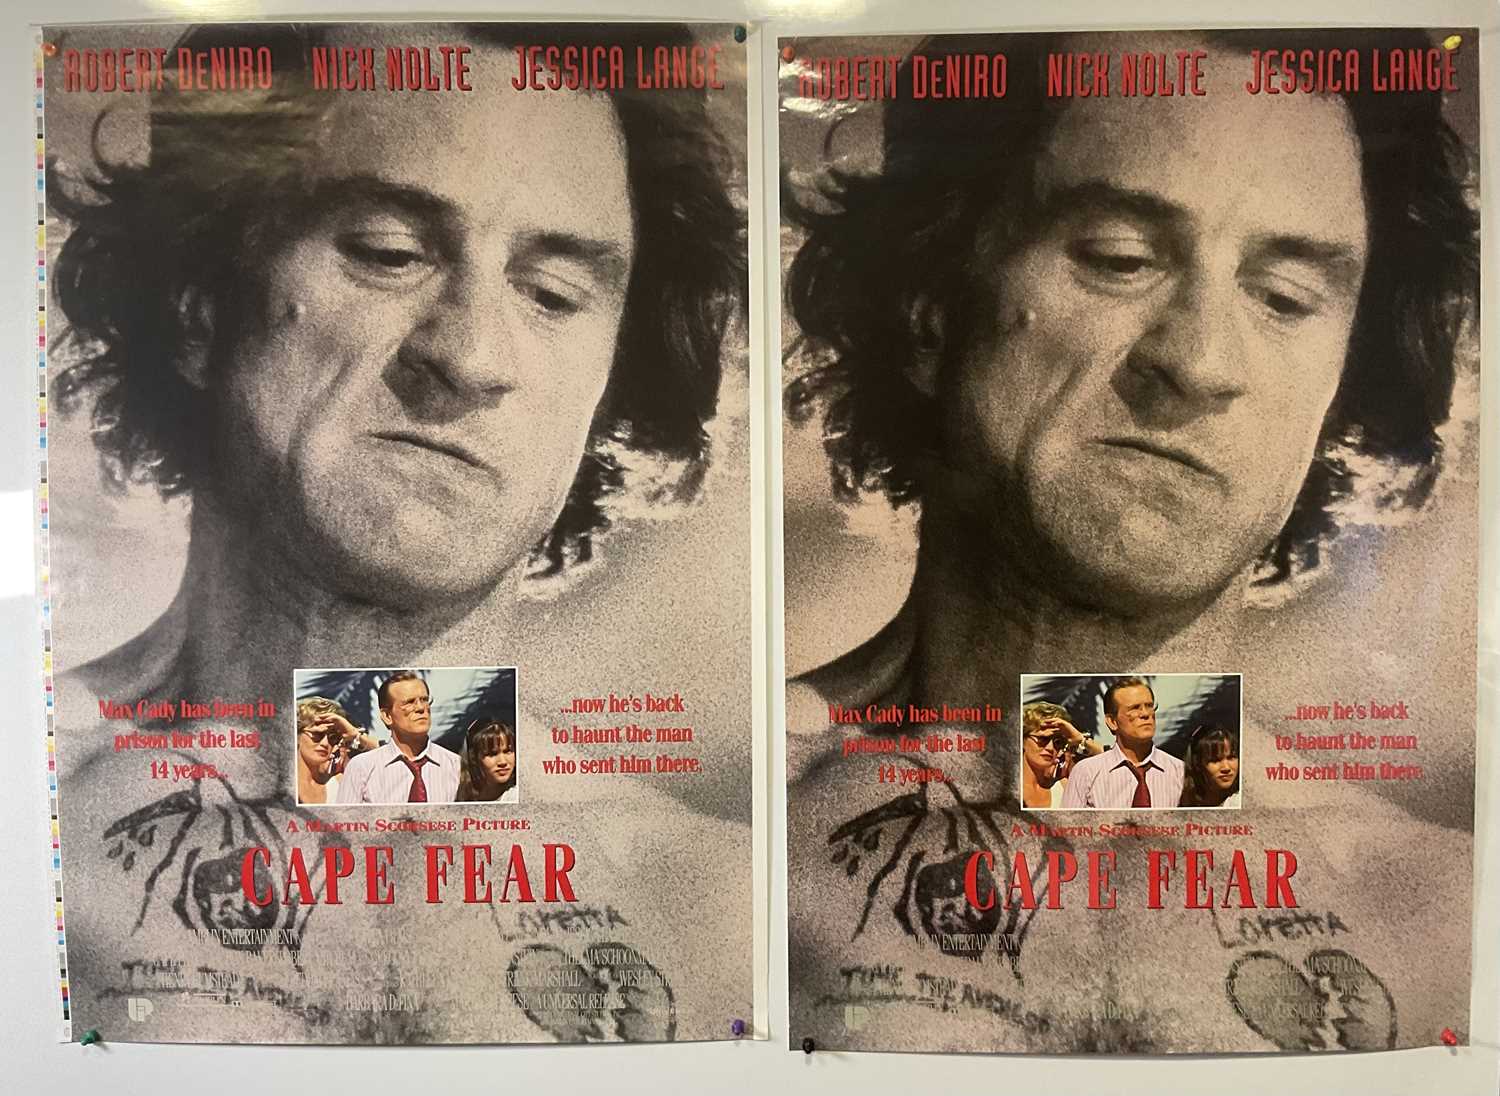 CAPE FEAR (1991) - Two Style B one sheet film posters - hard to find design featuring artwork by